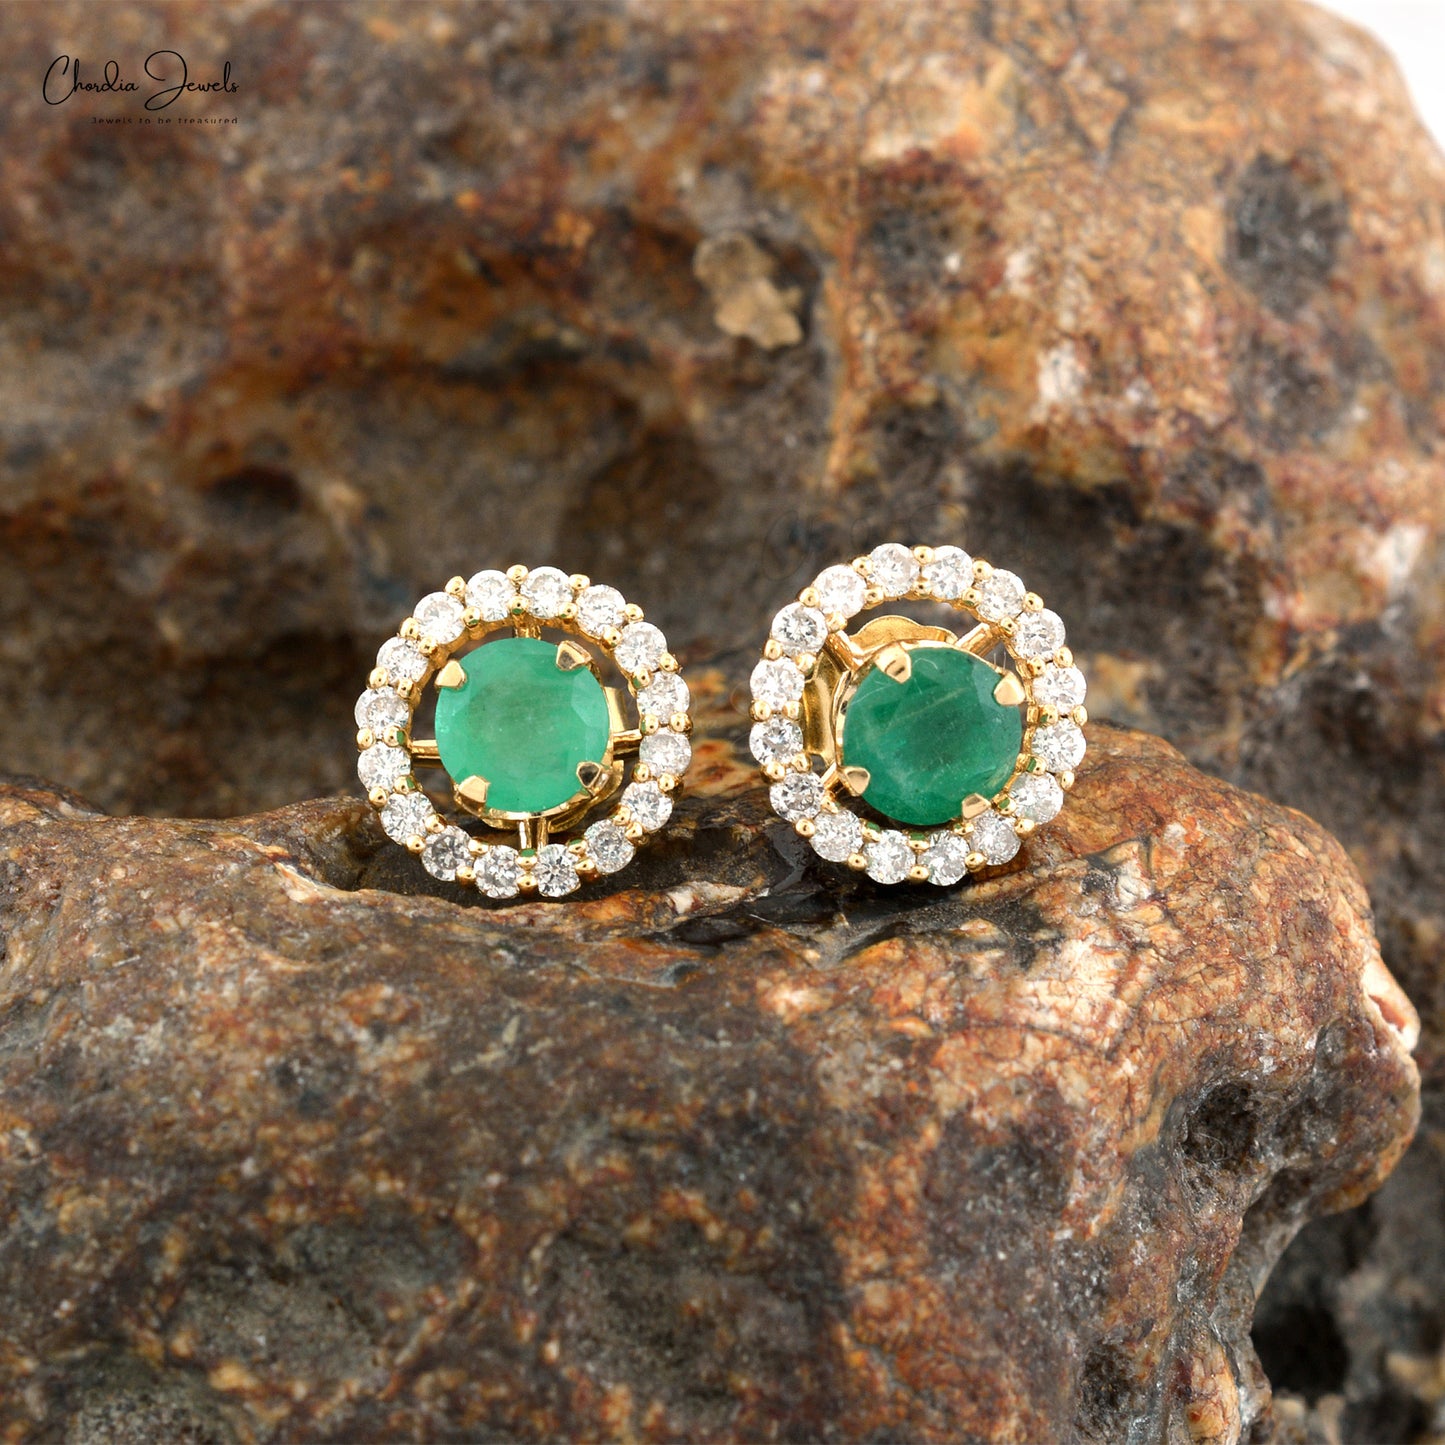 Load image into Gallery viewer, Real Emerald Detachable Earrings 4mm Brilliant Round Cut Gemstone Studs 14k Solid Yellow Gold Minimal Fine Jewelry For Daughter
